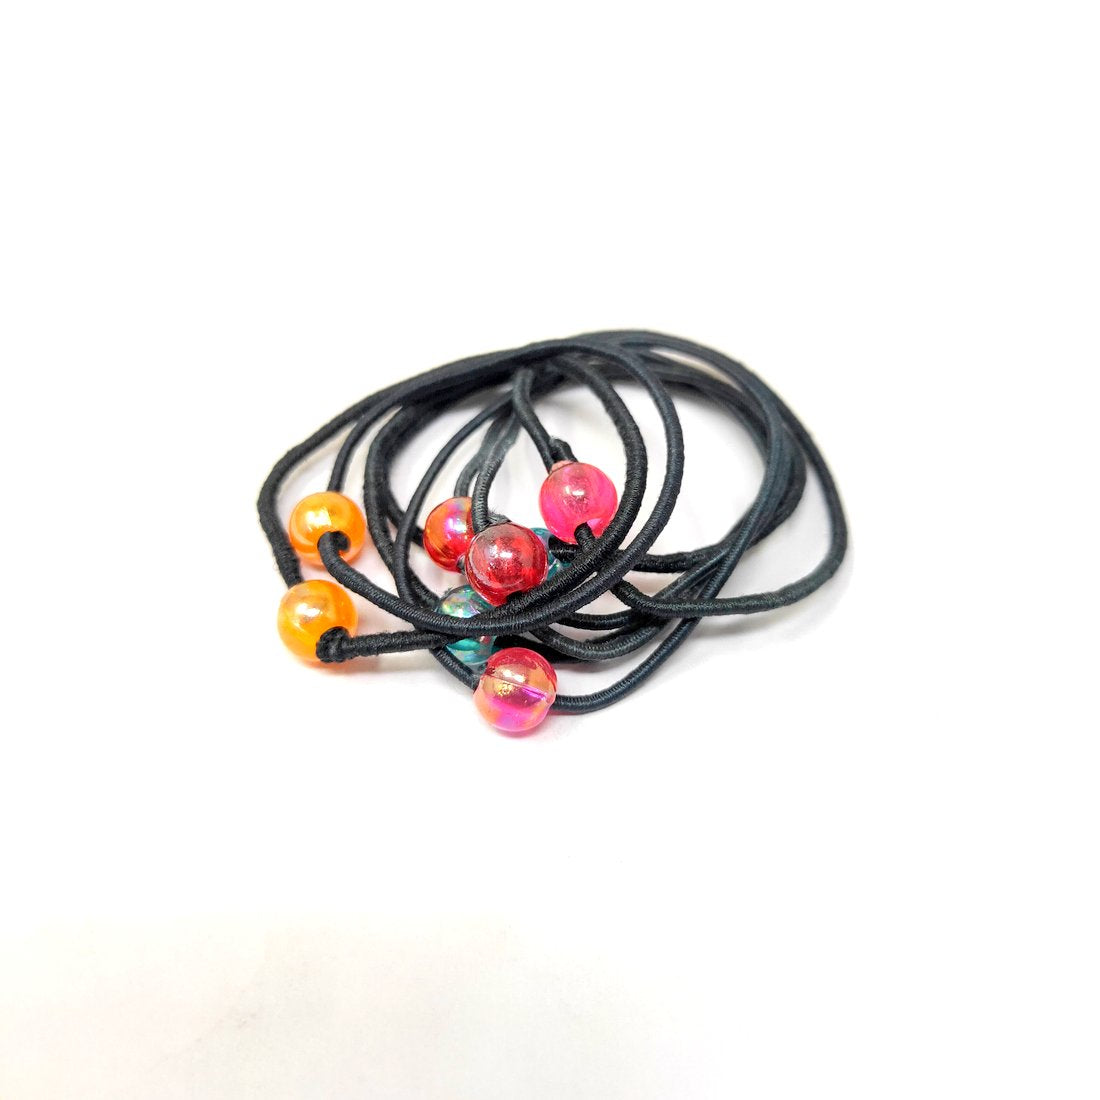 Anokhi Ada Black with Multi-Colour Beads small size Elastic Rubber for Girls and Women (15-25 Ponytail Holders, 8 Pcs of Rubber)